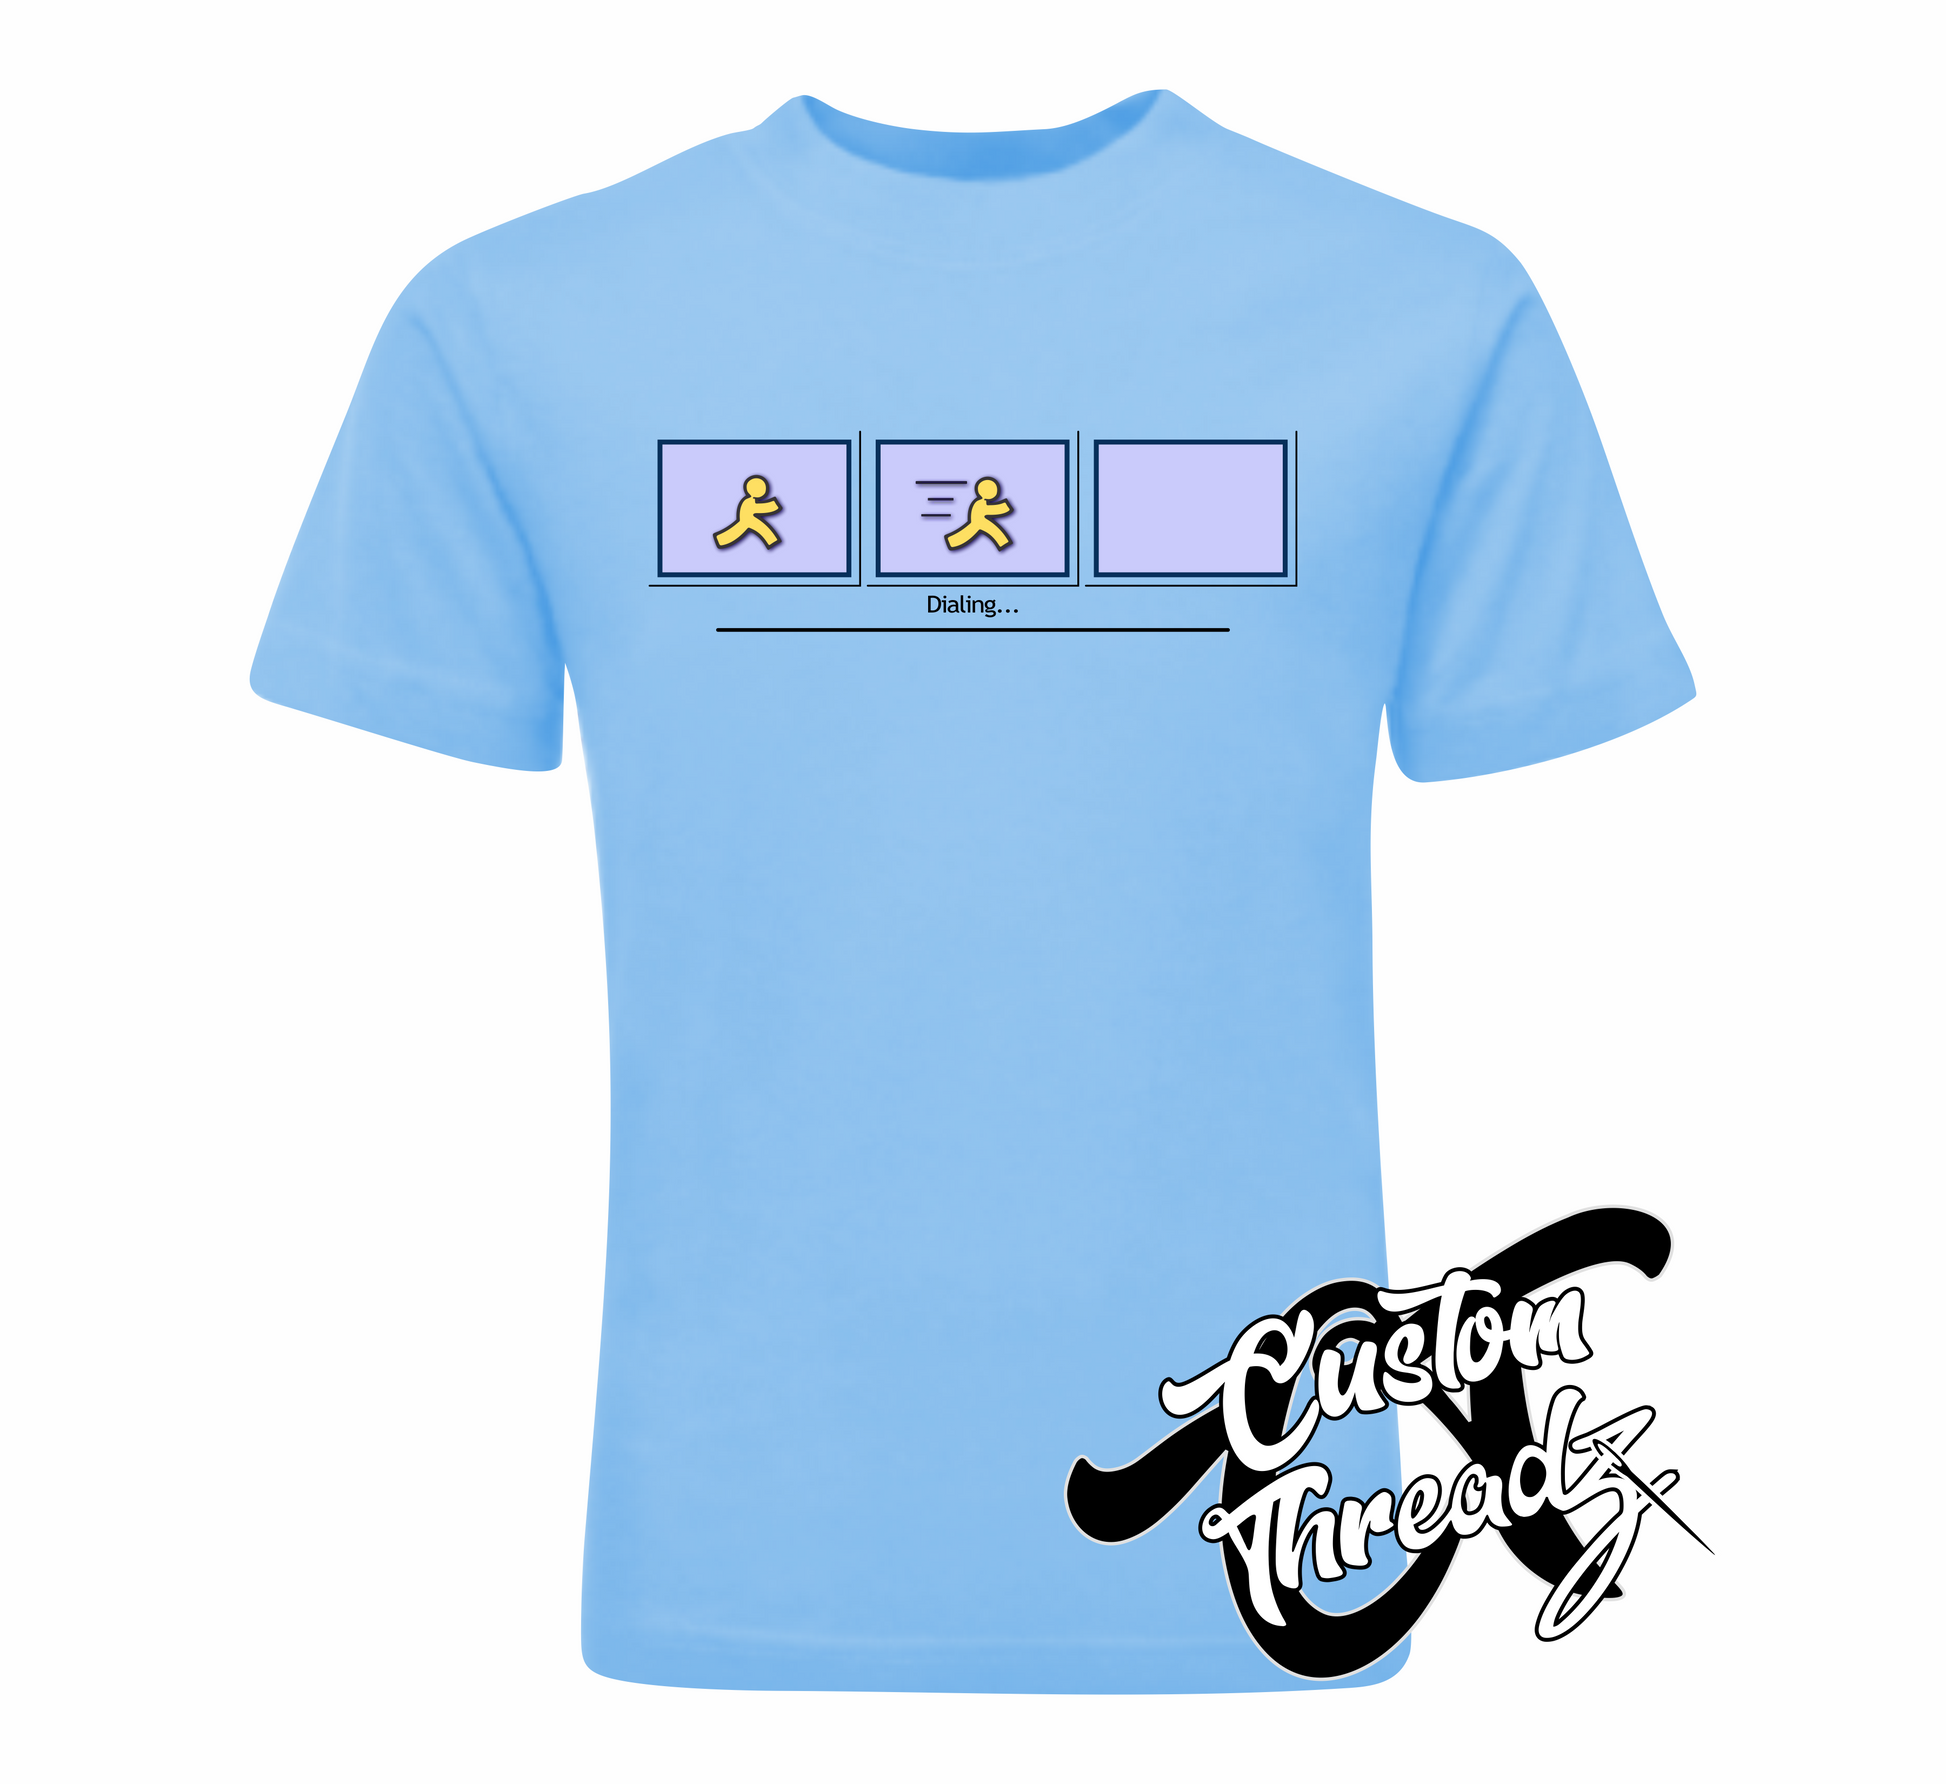 light blue youth tee with AOL loading dial up DTG printed design